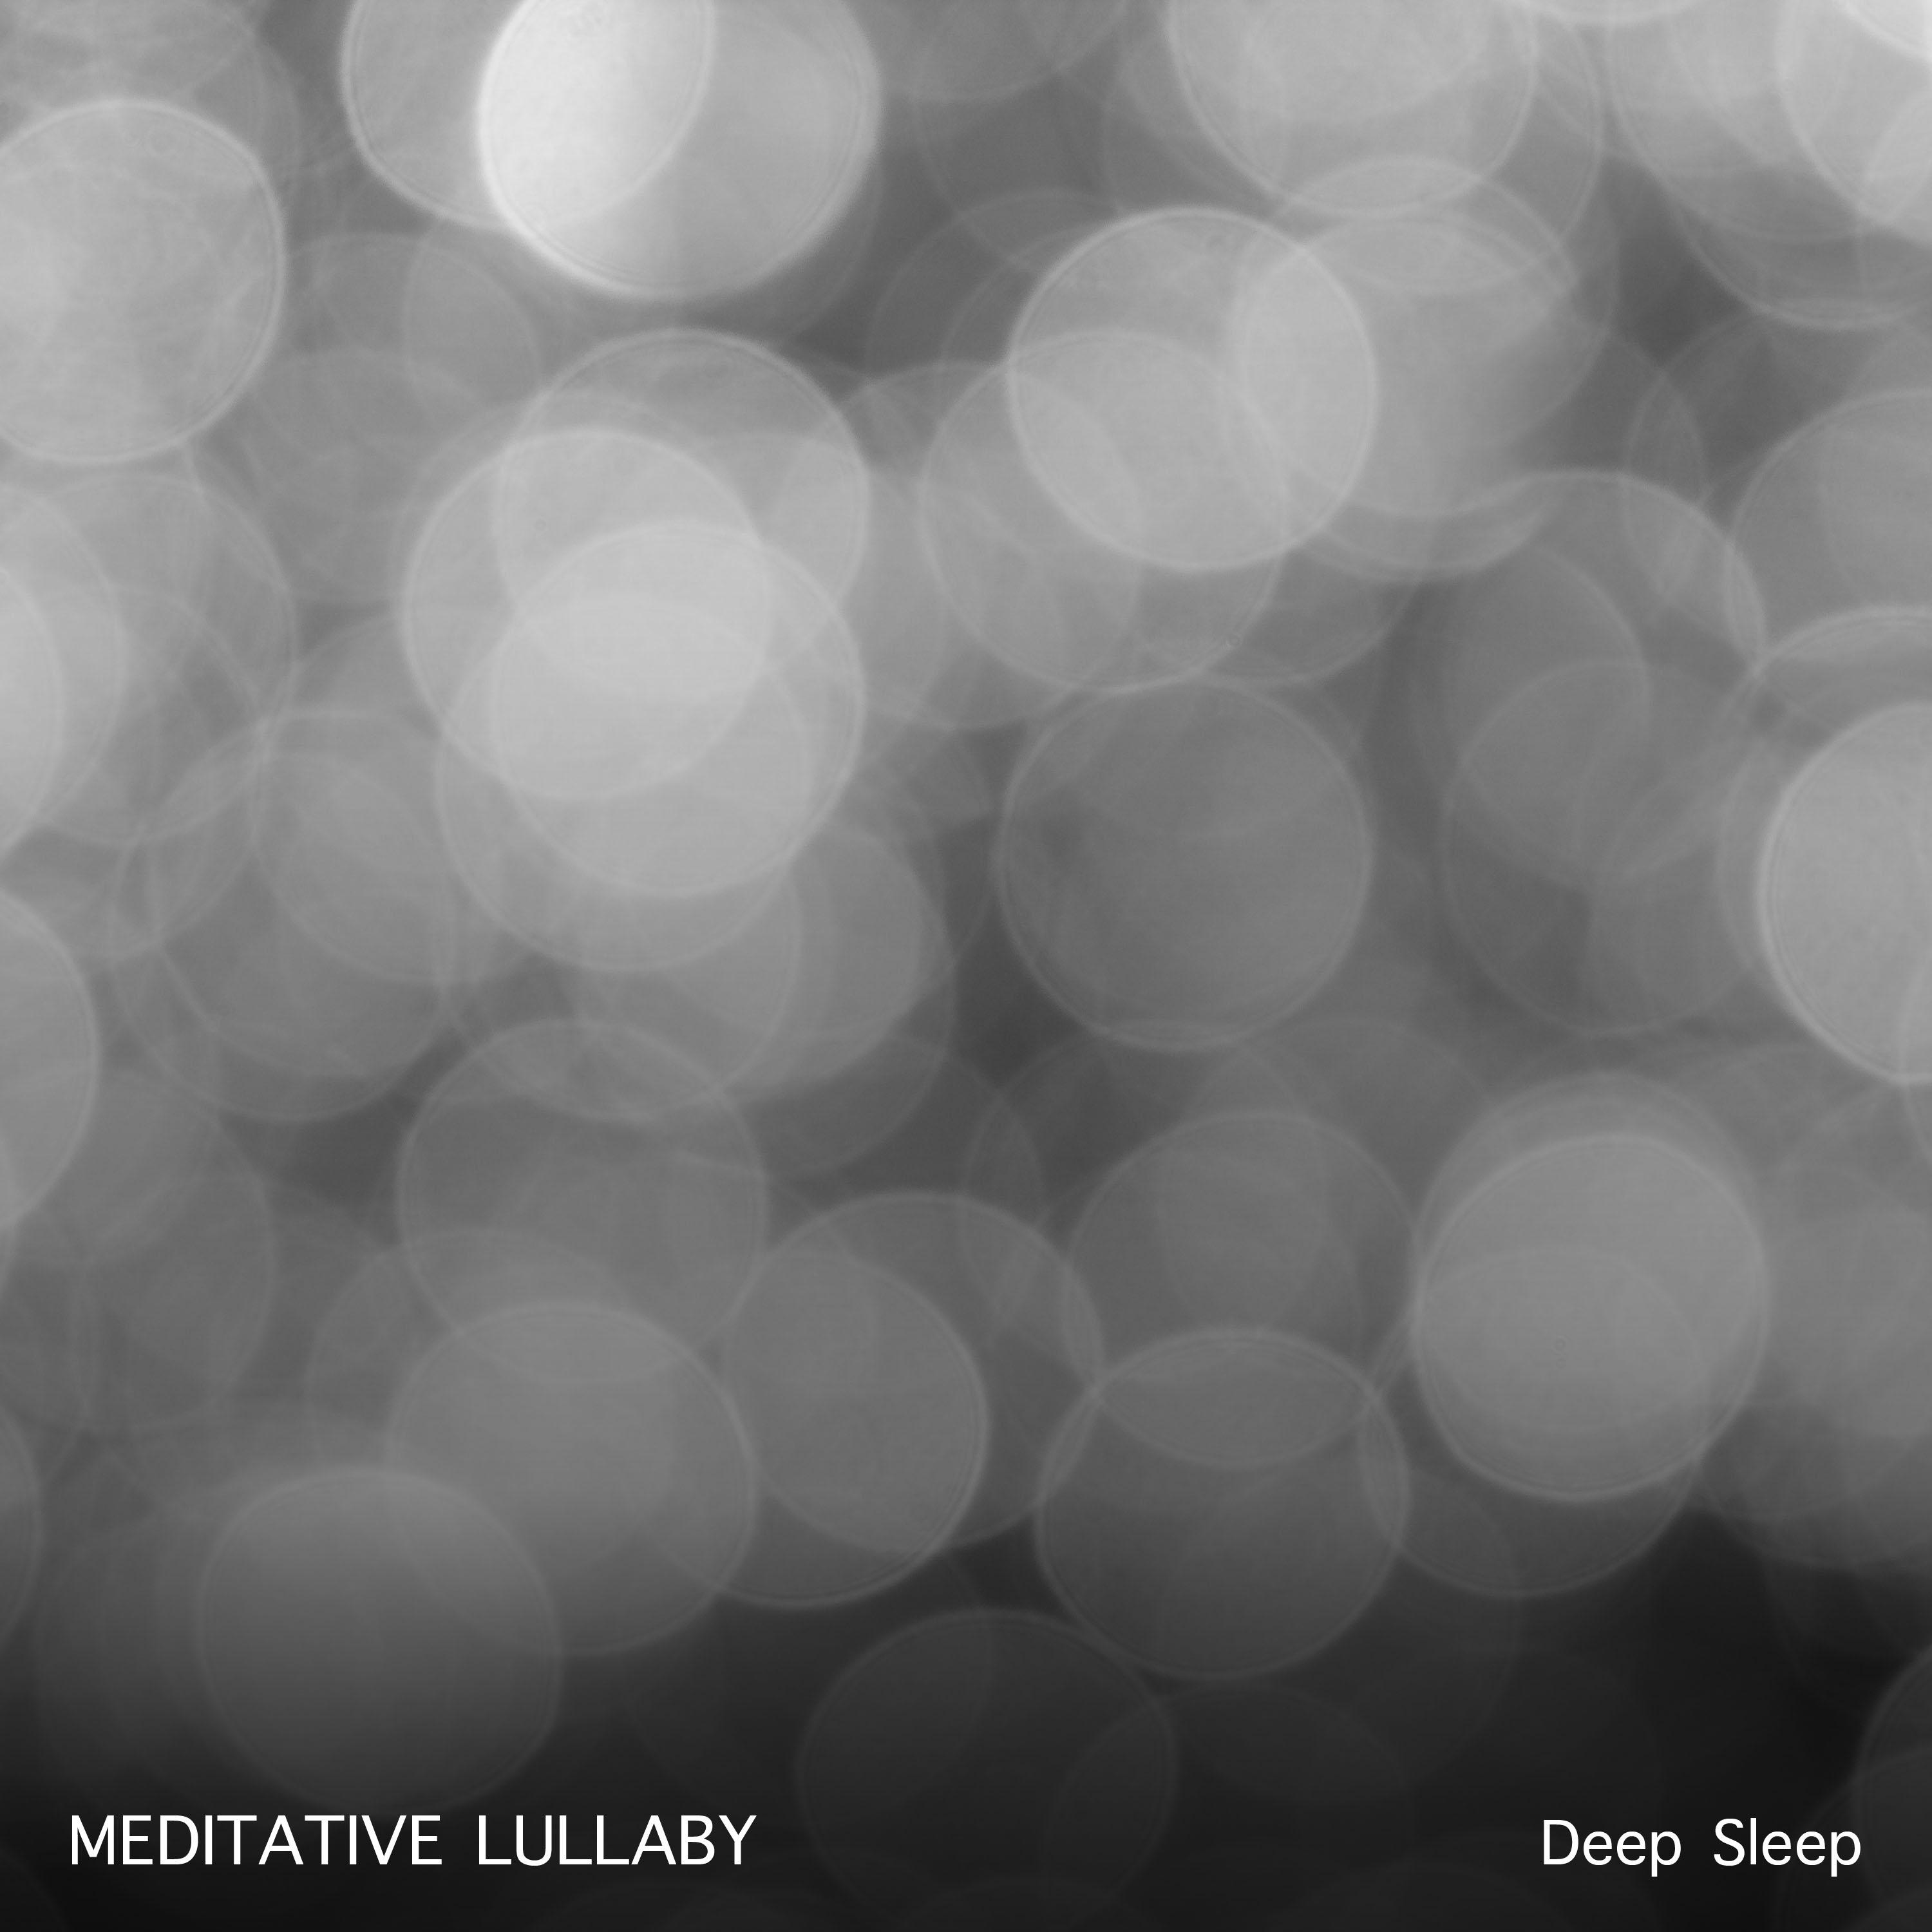 15 Sounds of Meditative Lullaby for Relaxation & Deep Sleep